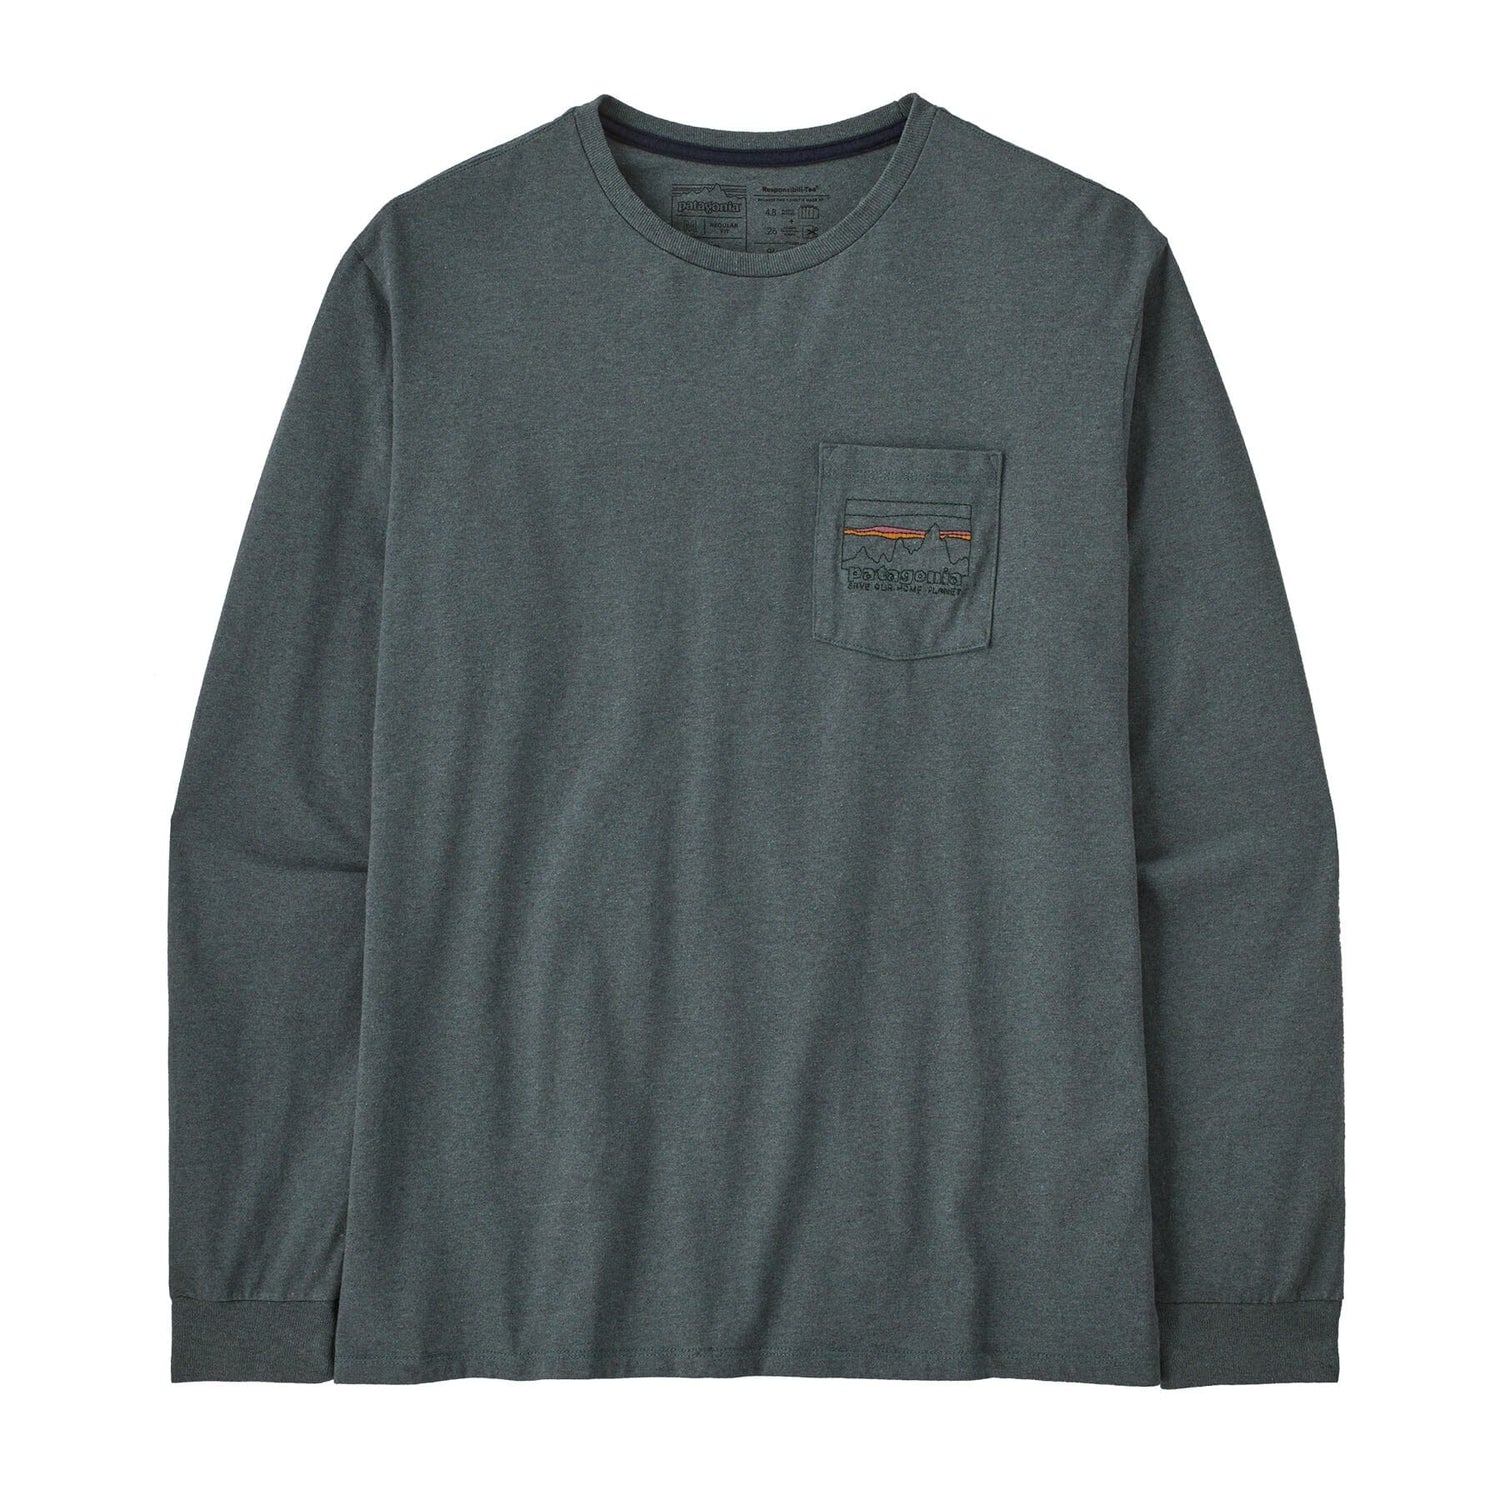 Patagonia M's L/S '73 Skyline Pocket Responsibili-Tee - Recycled Cotton & Recycled PET Nouveau Green Shirt